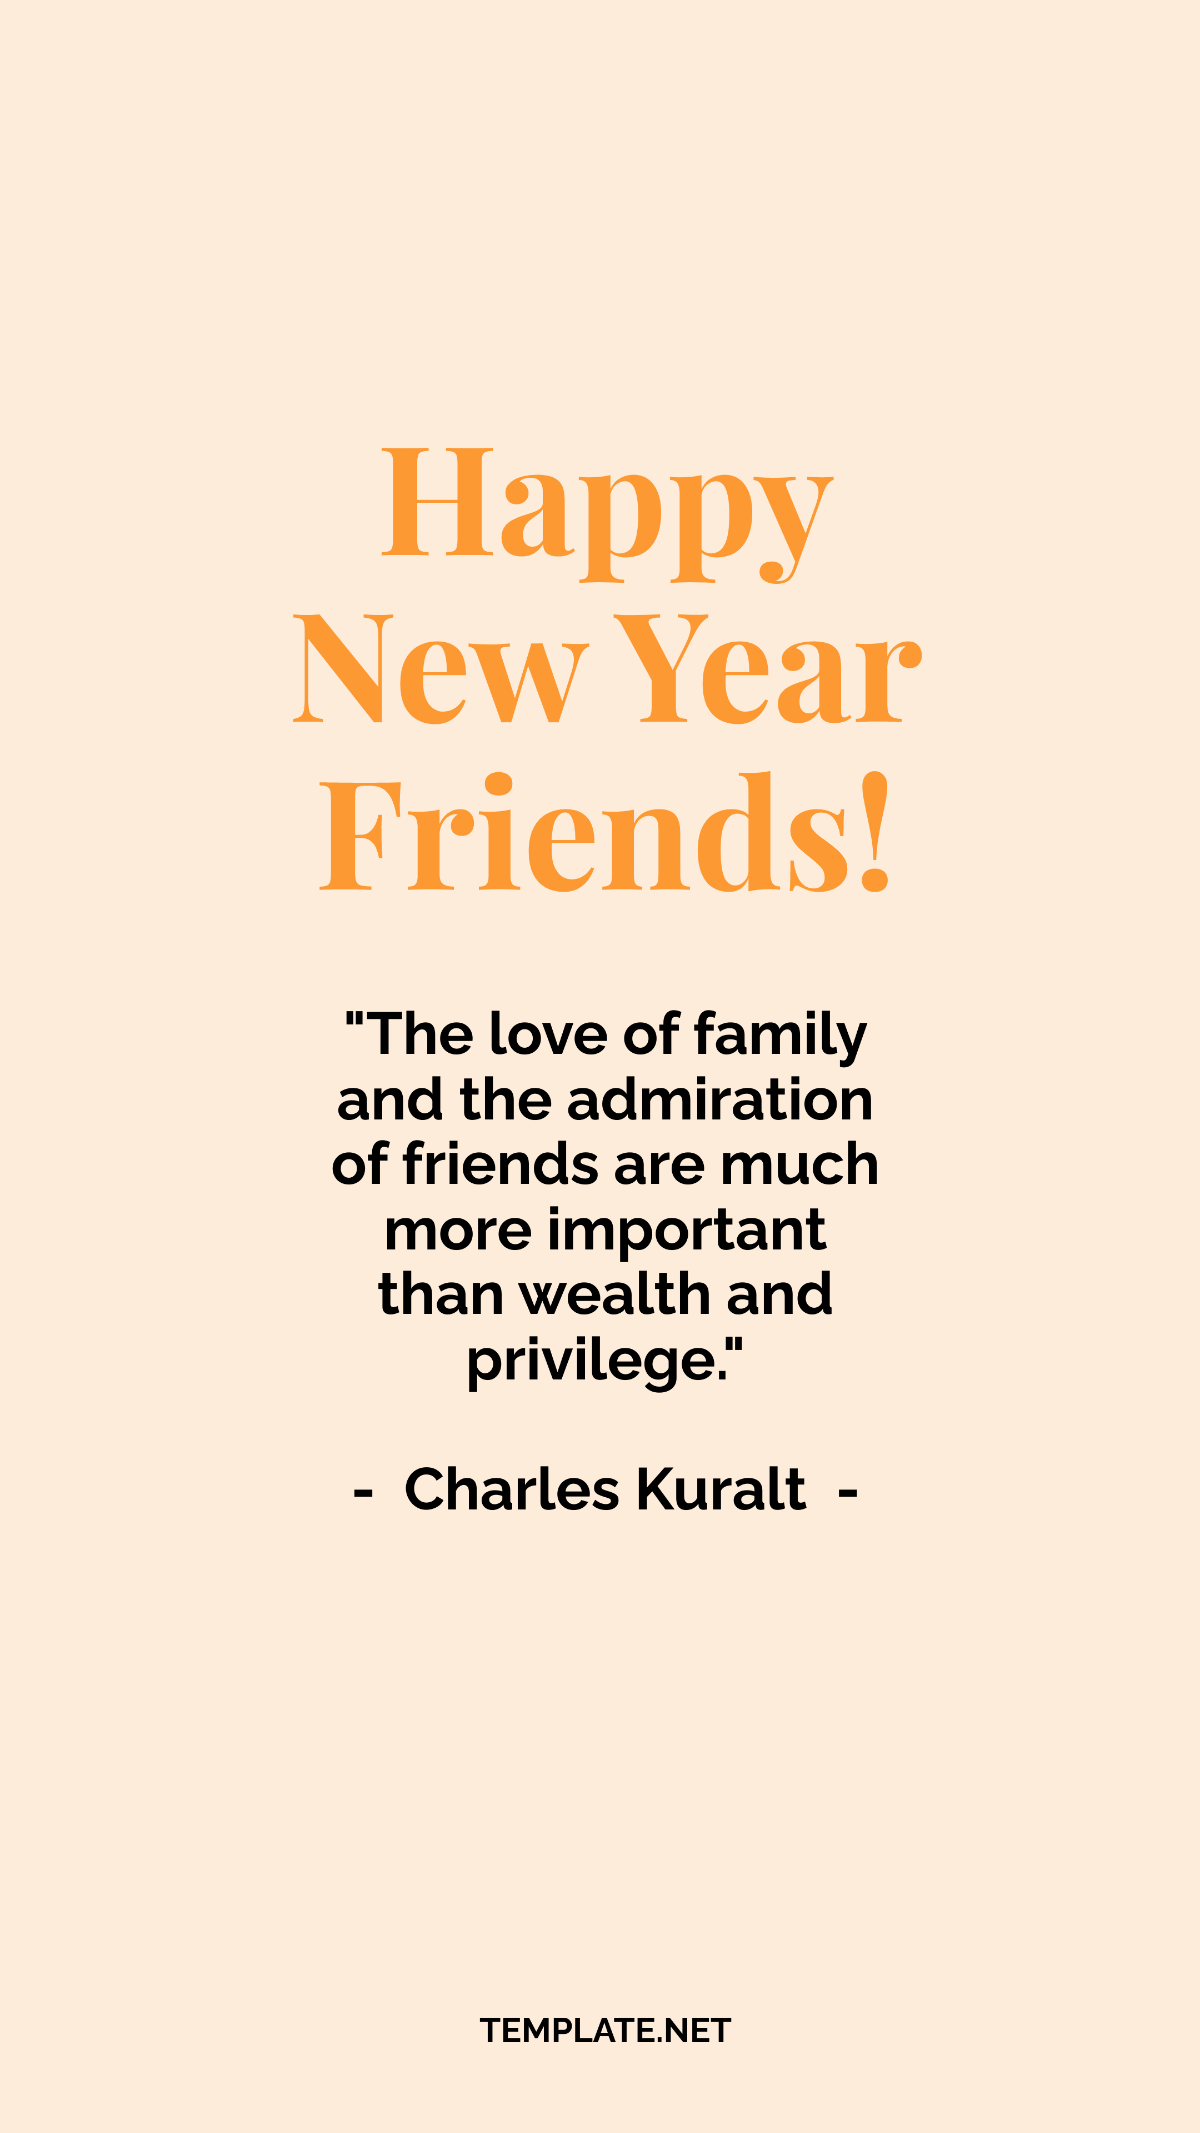 New Year Quote For Friends Template